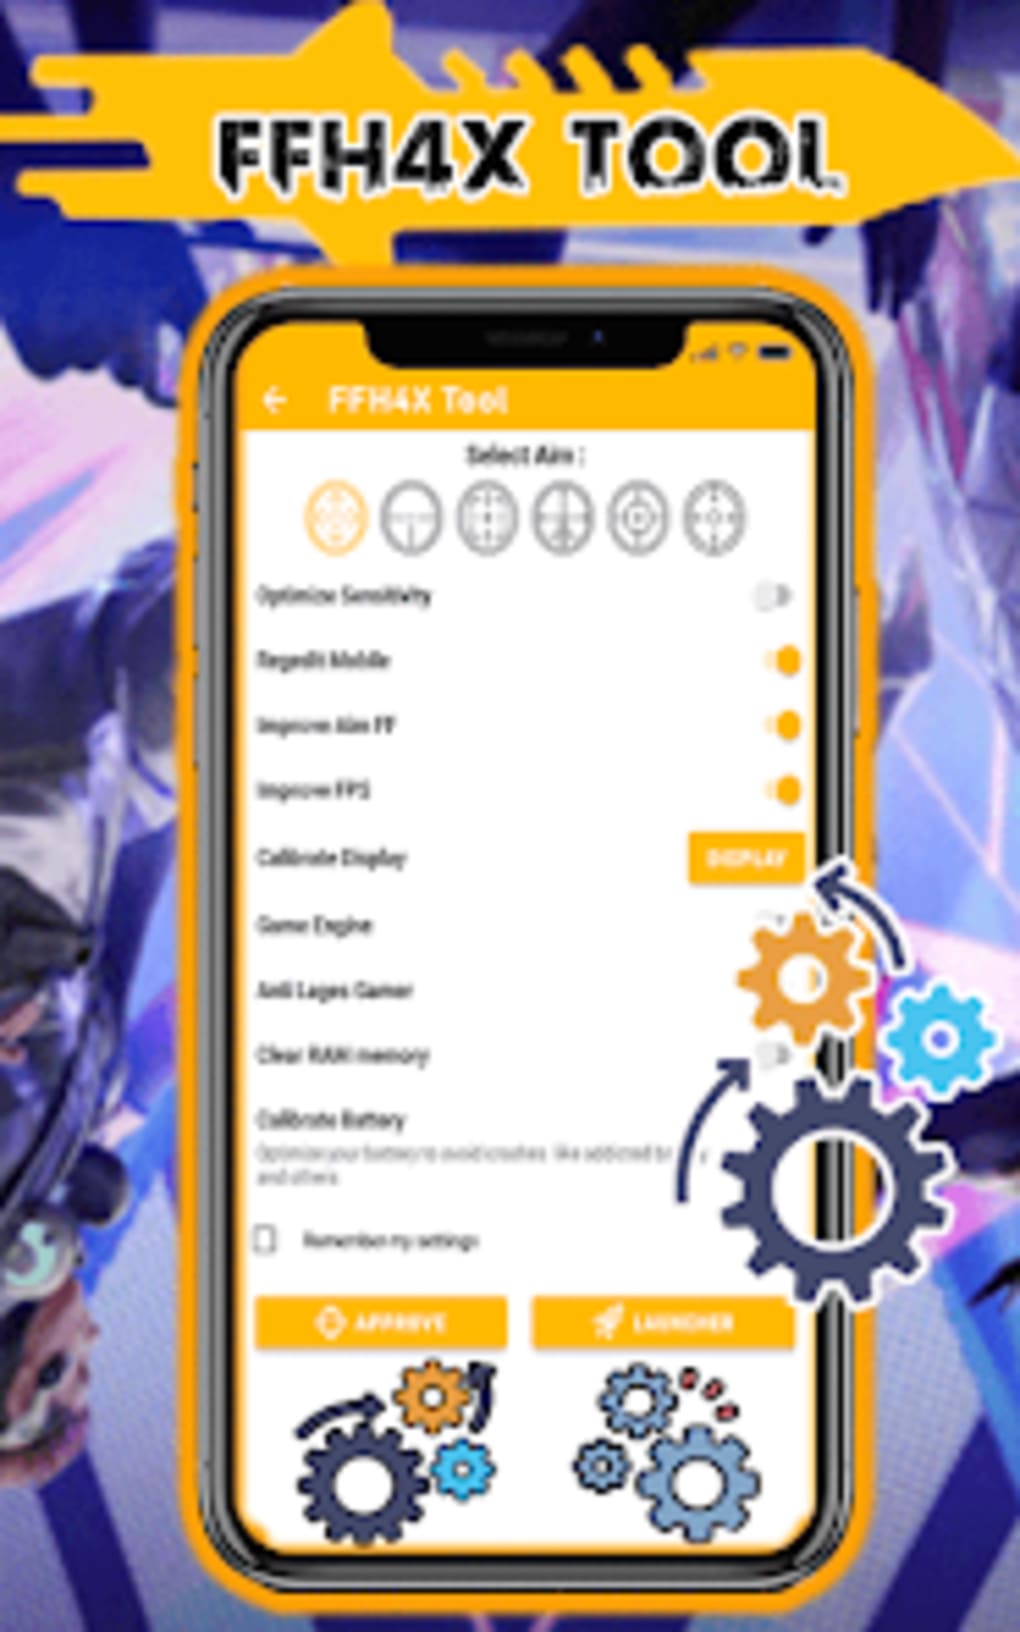 FFH4X MOBILE APK (Android App) - Free Download